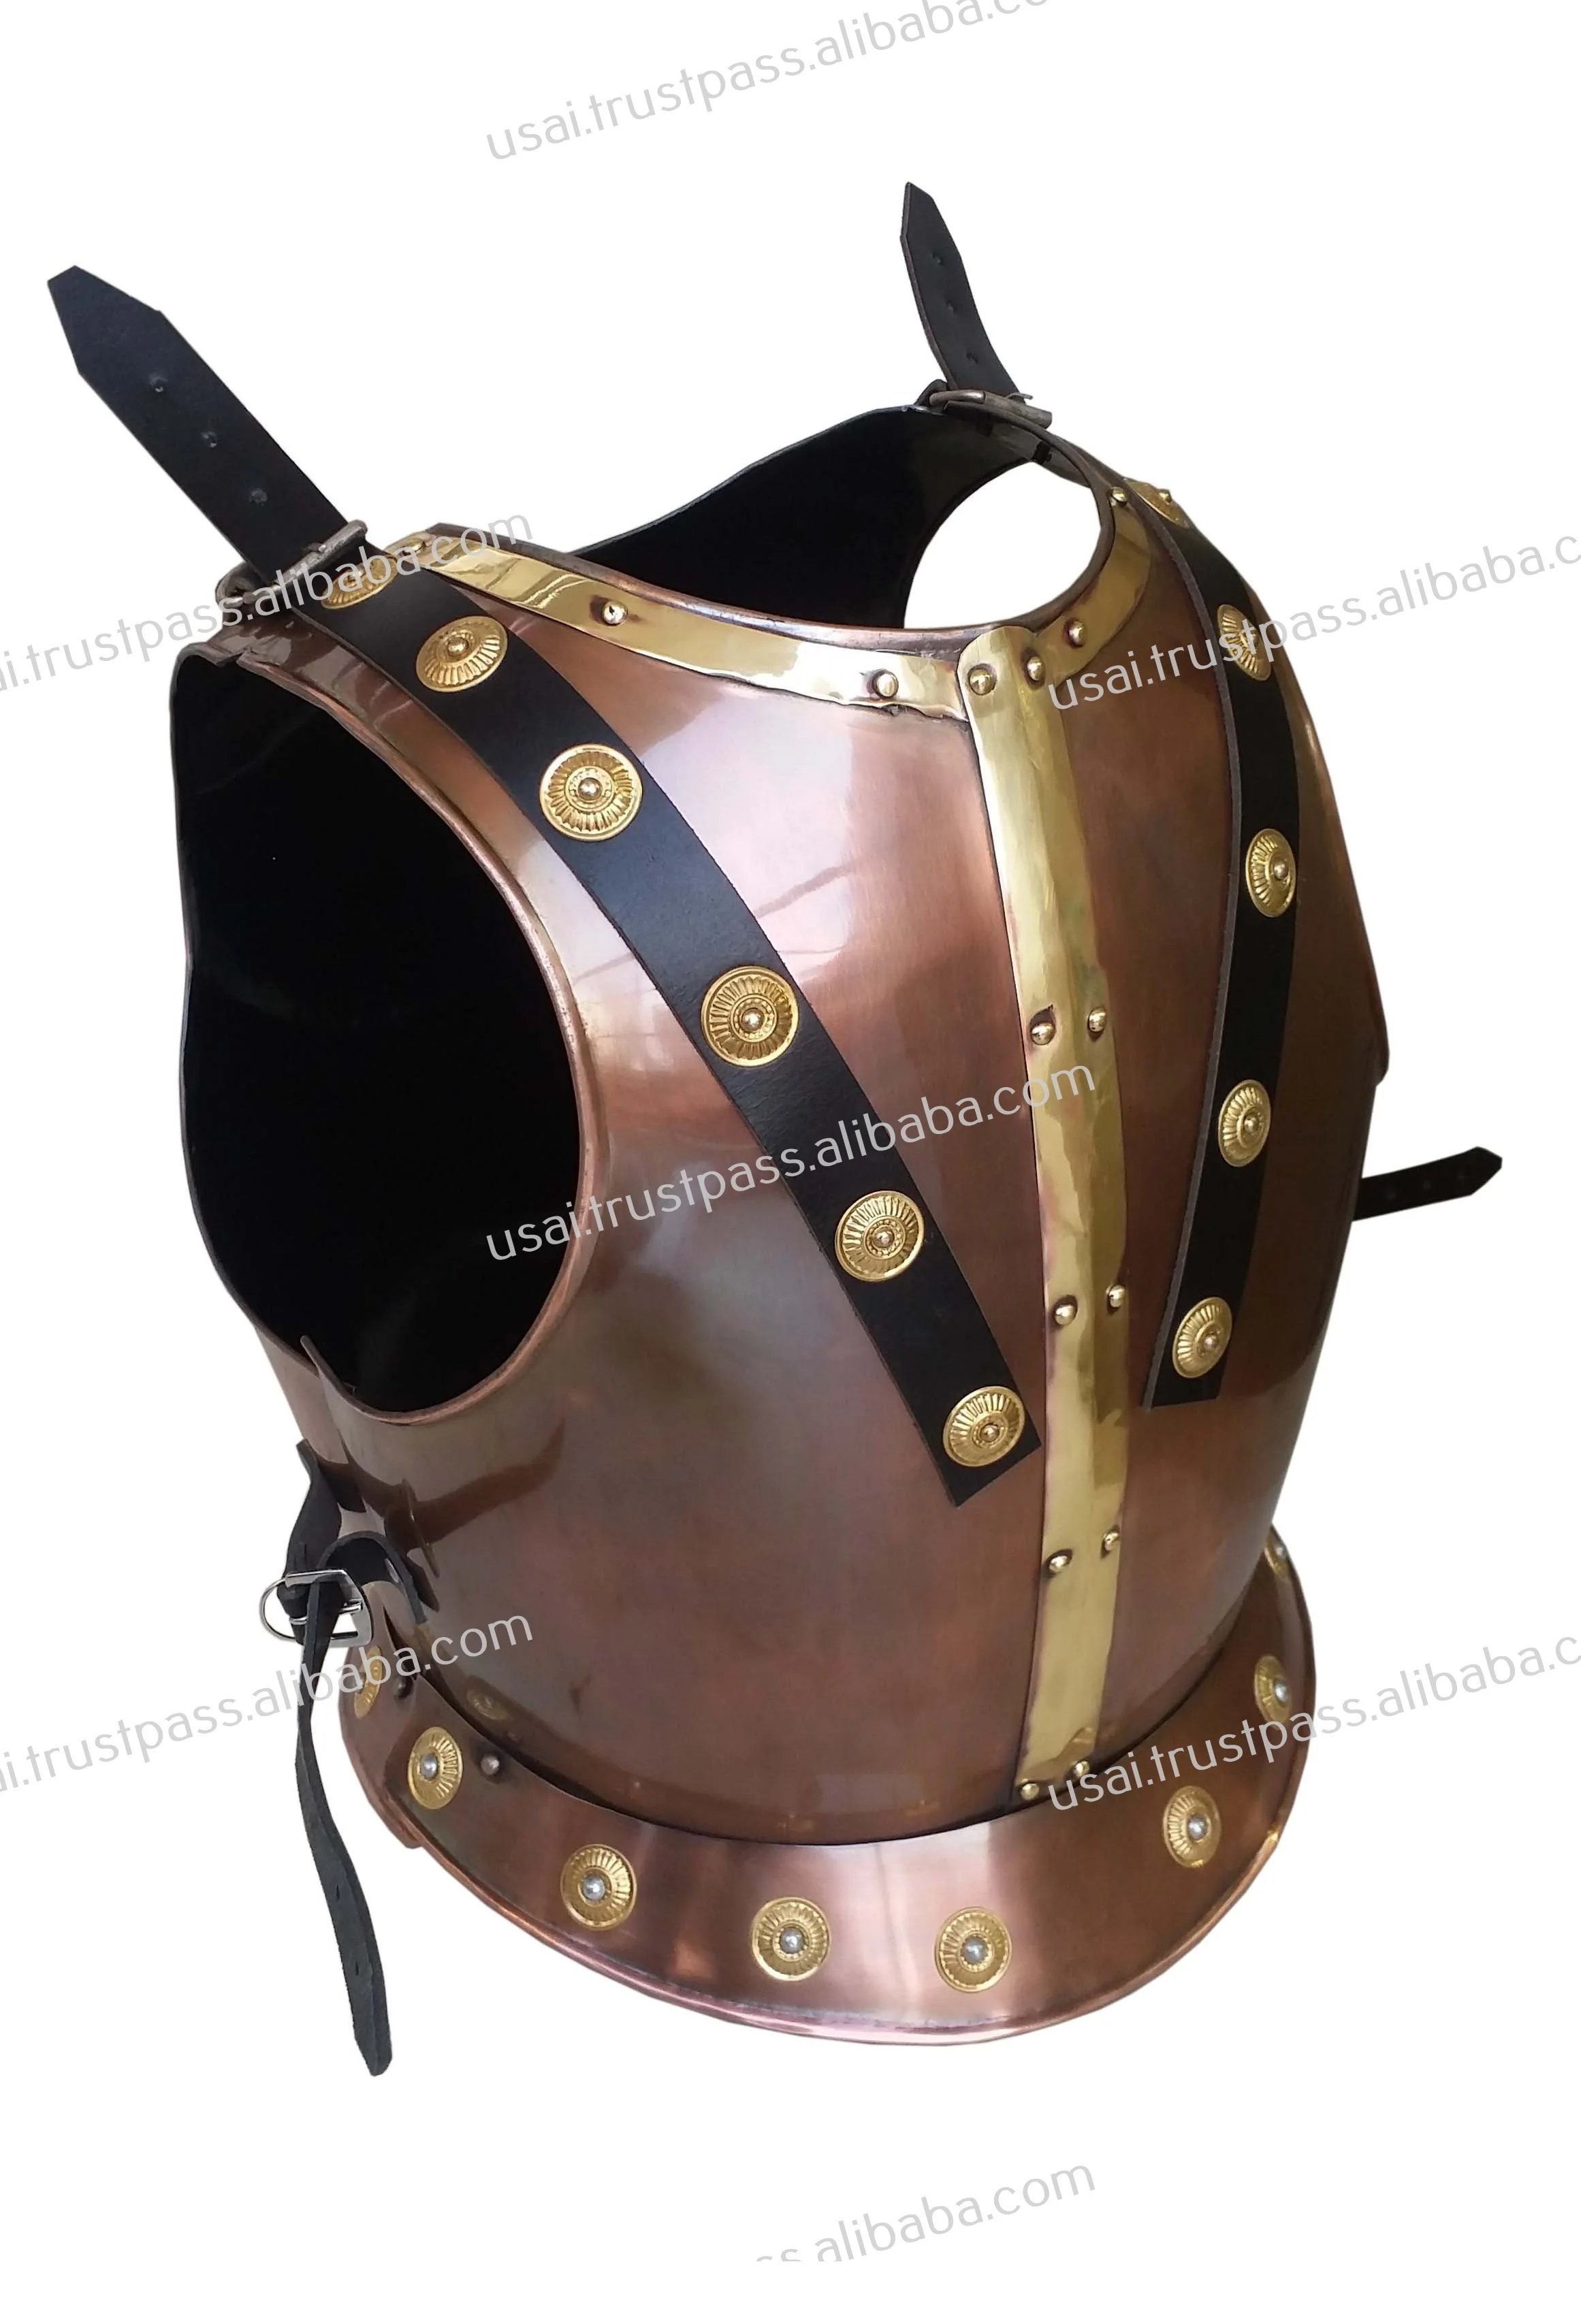 Muscle Jacket Antique Finish Nautical Medieval Armor Collectible Leather Strap 